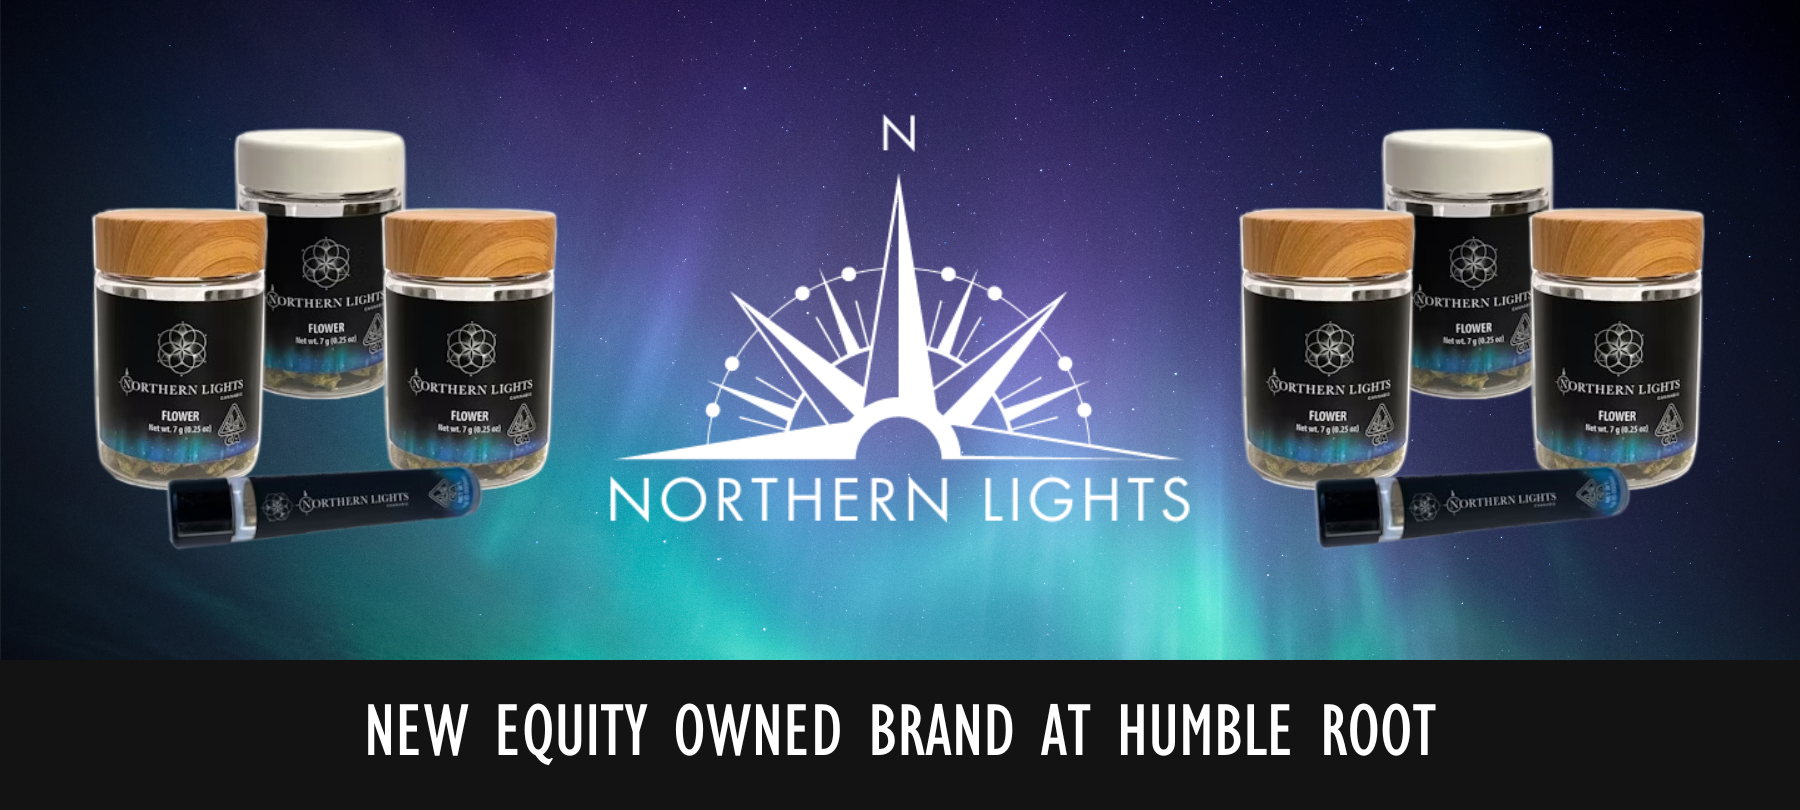 Northern Lights, a new equity owned brand at Humble Root